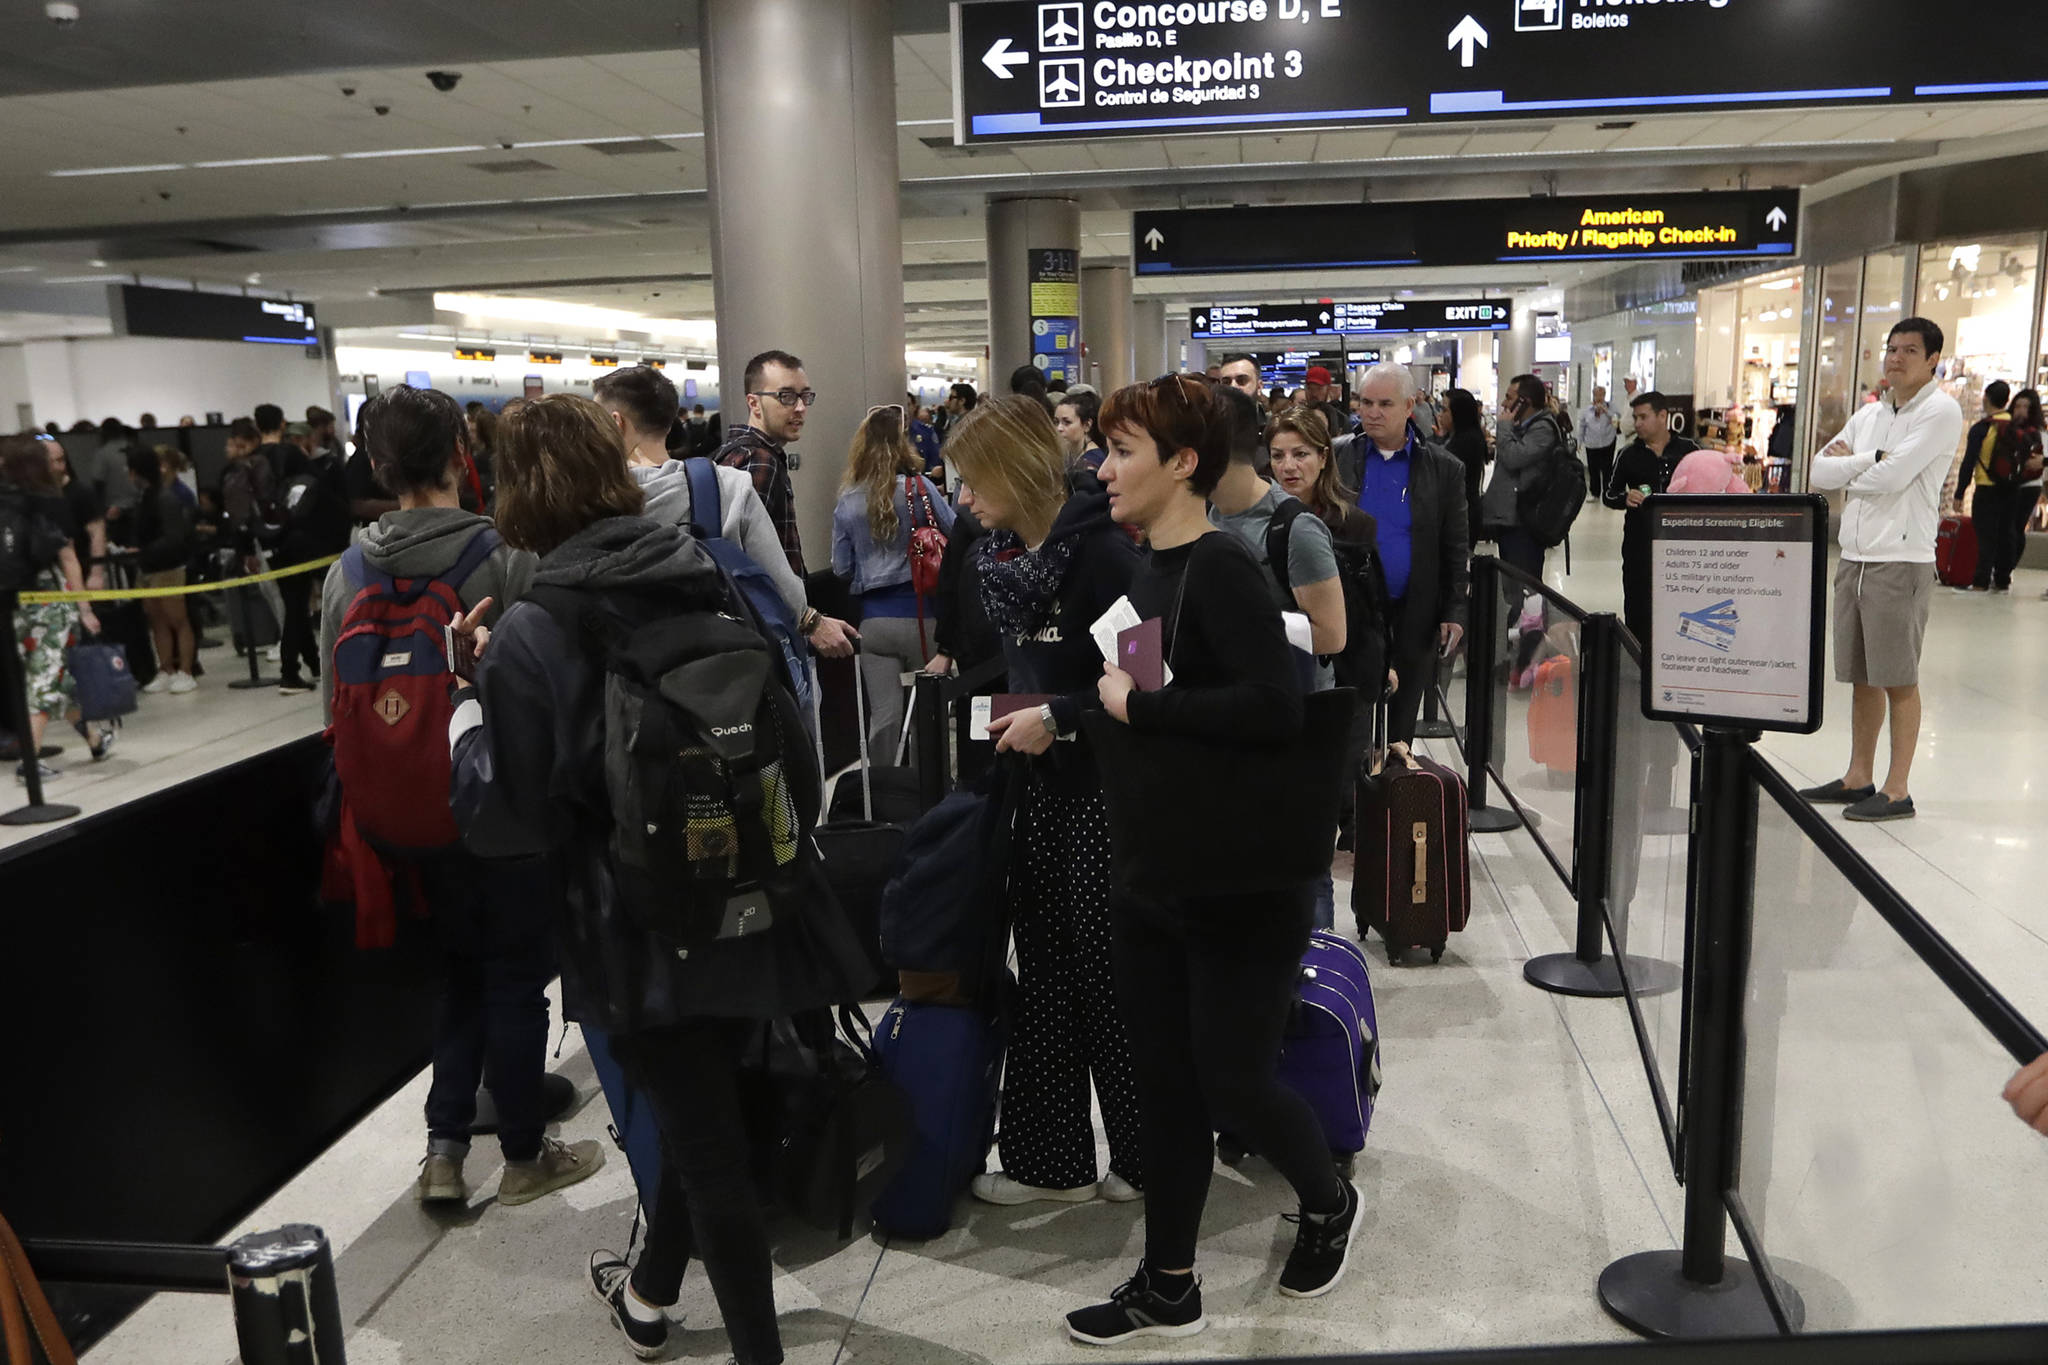 Passengers wait in line at a security checkpoint at Miami International Airport, Friday, Jan. 18, 2019, in Miami. (Lynne Sladky | Associated Press)